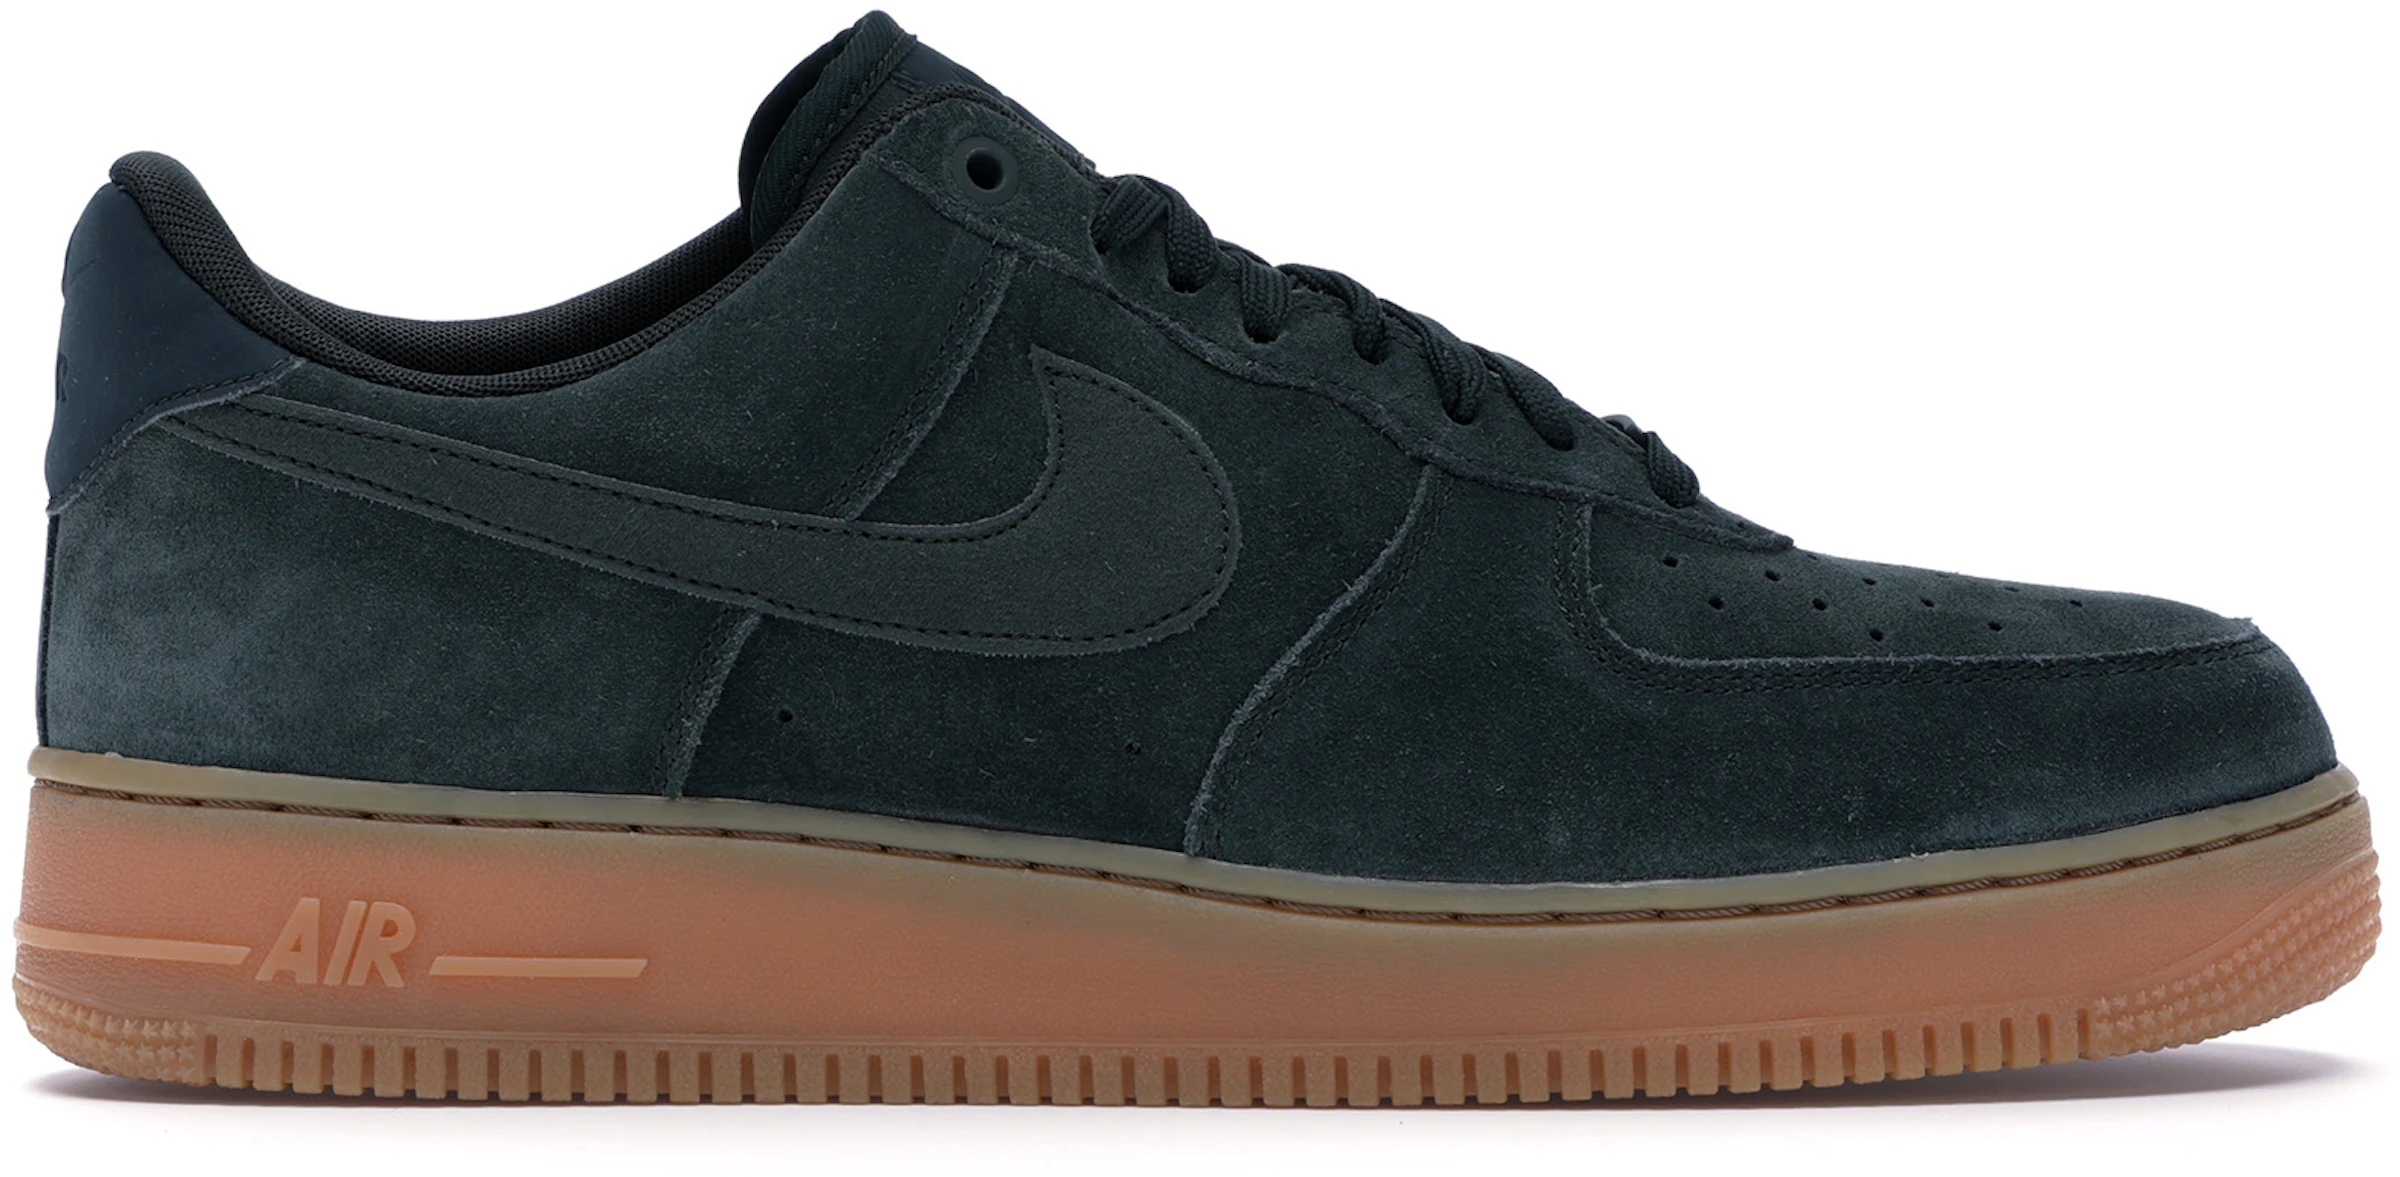 gasolina Capilla Cortés Nike Air Force 1 Low '07 LV8 Suede Outdoor Green Gum - AA1117-300 - ES